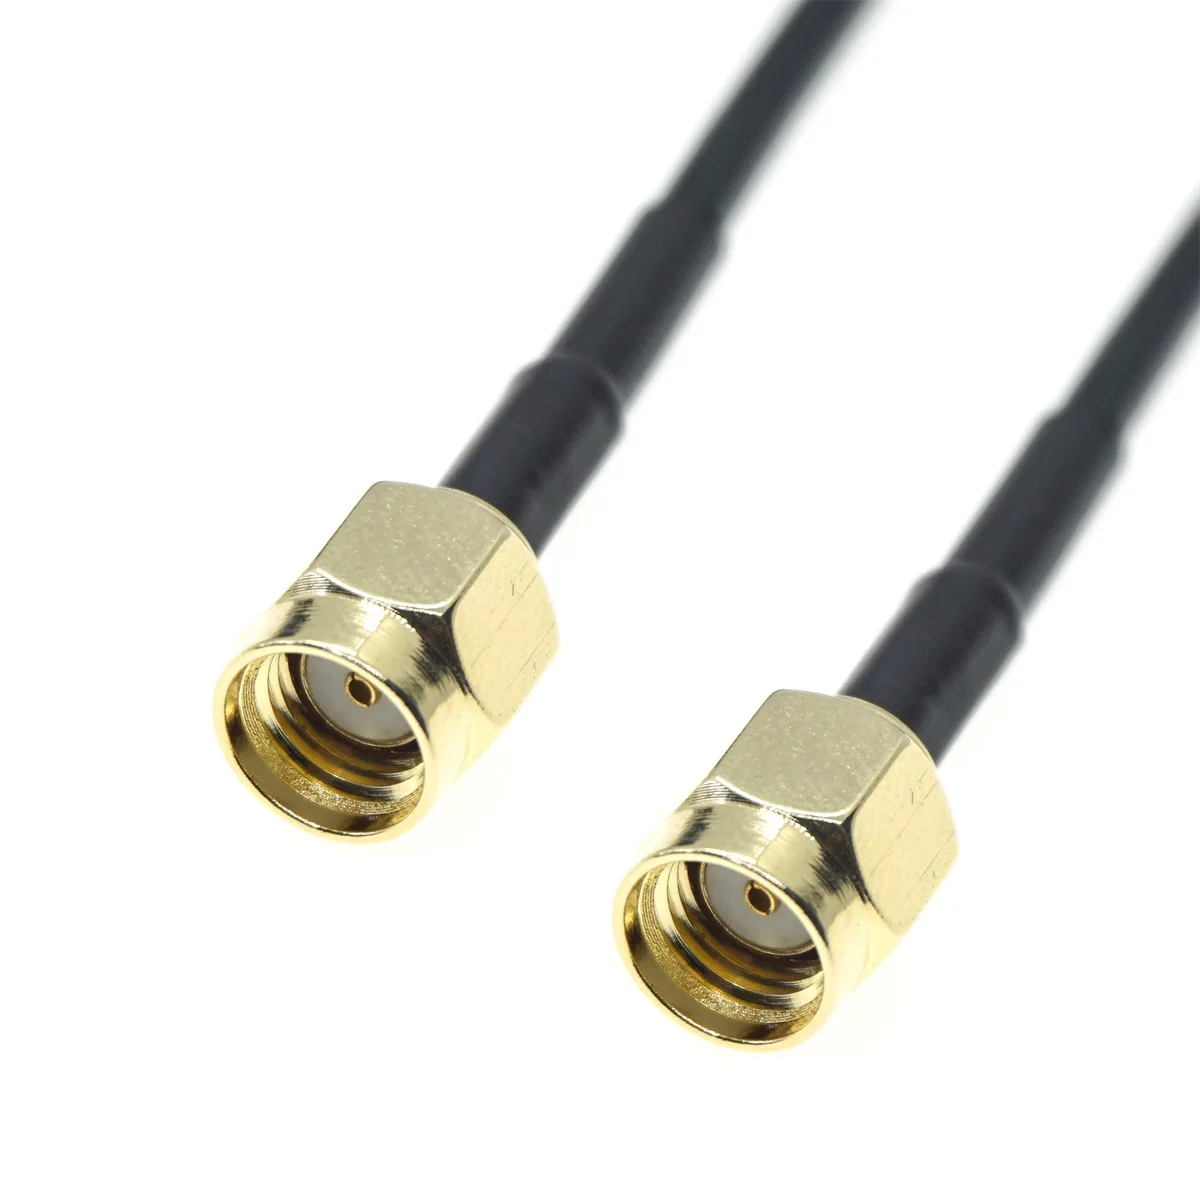 

RP-SMA SMA Connector Male to RP-SMA Male Extension Cable Wire for Coax Coaxial WiFi Network Card RG174 Router Antenna